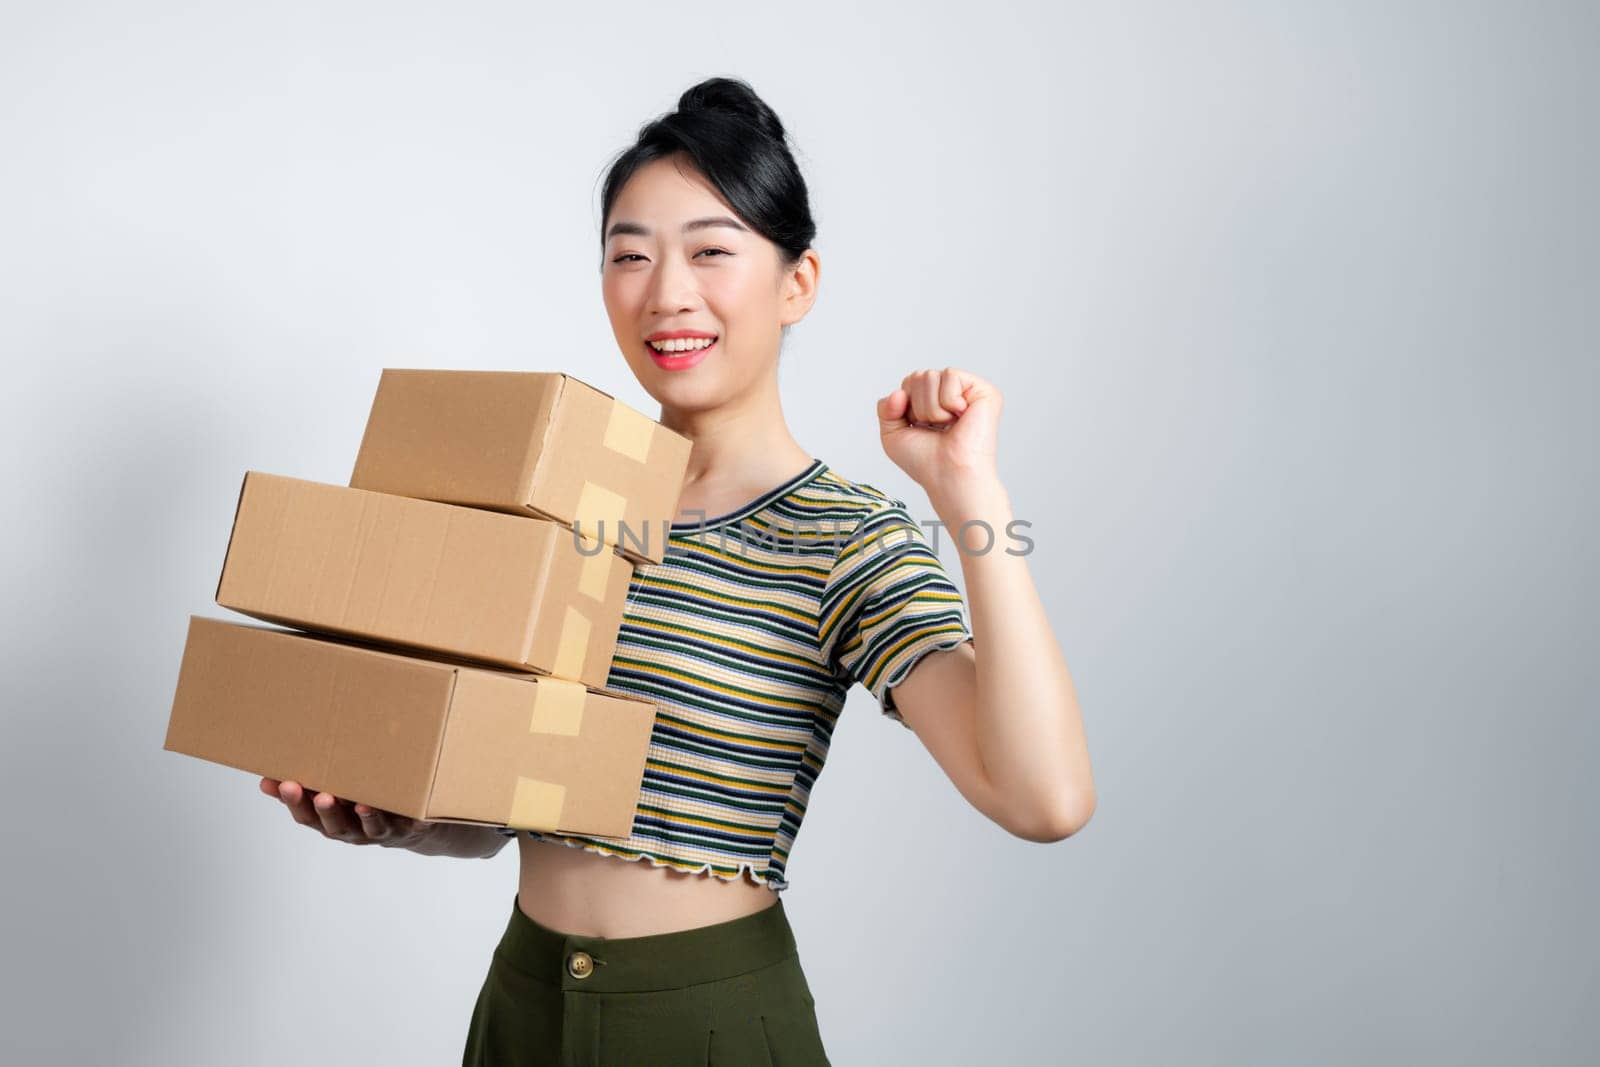 Young woman holding boxes celebrating victory and success very excited with raised arms by makidotvn